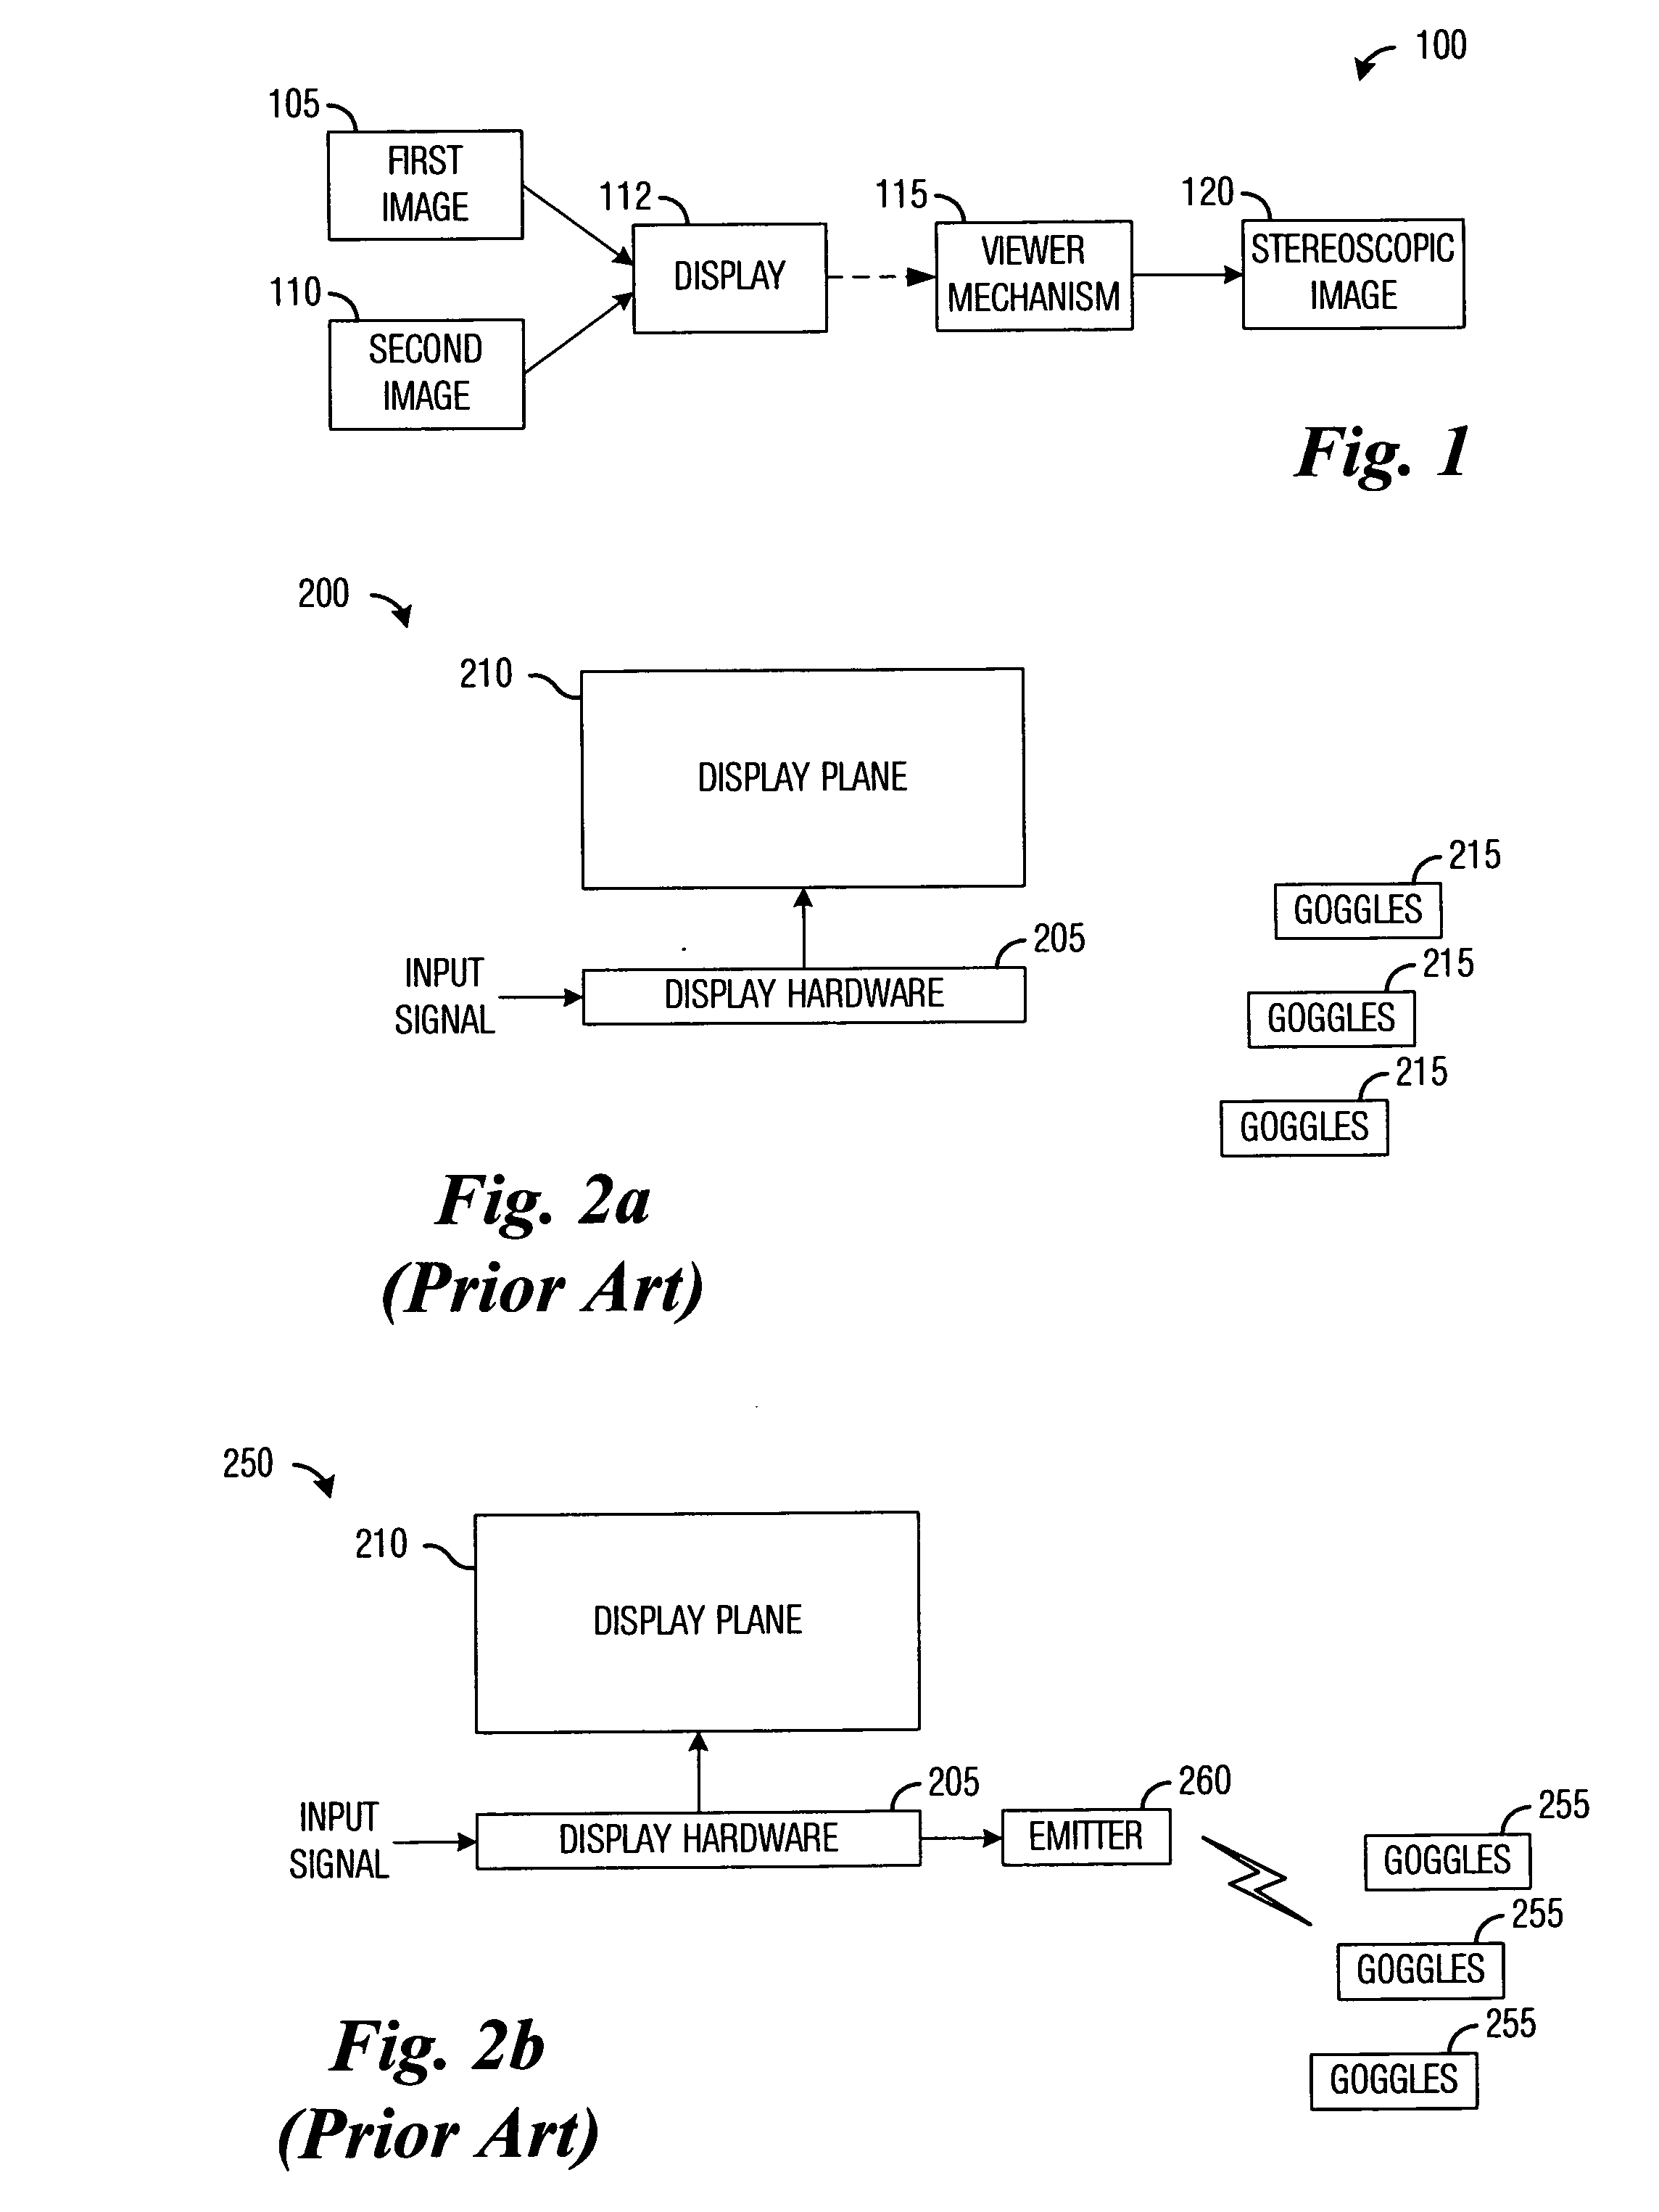 System and method for synchronizing a viewing device